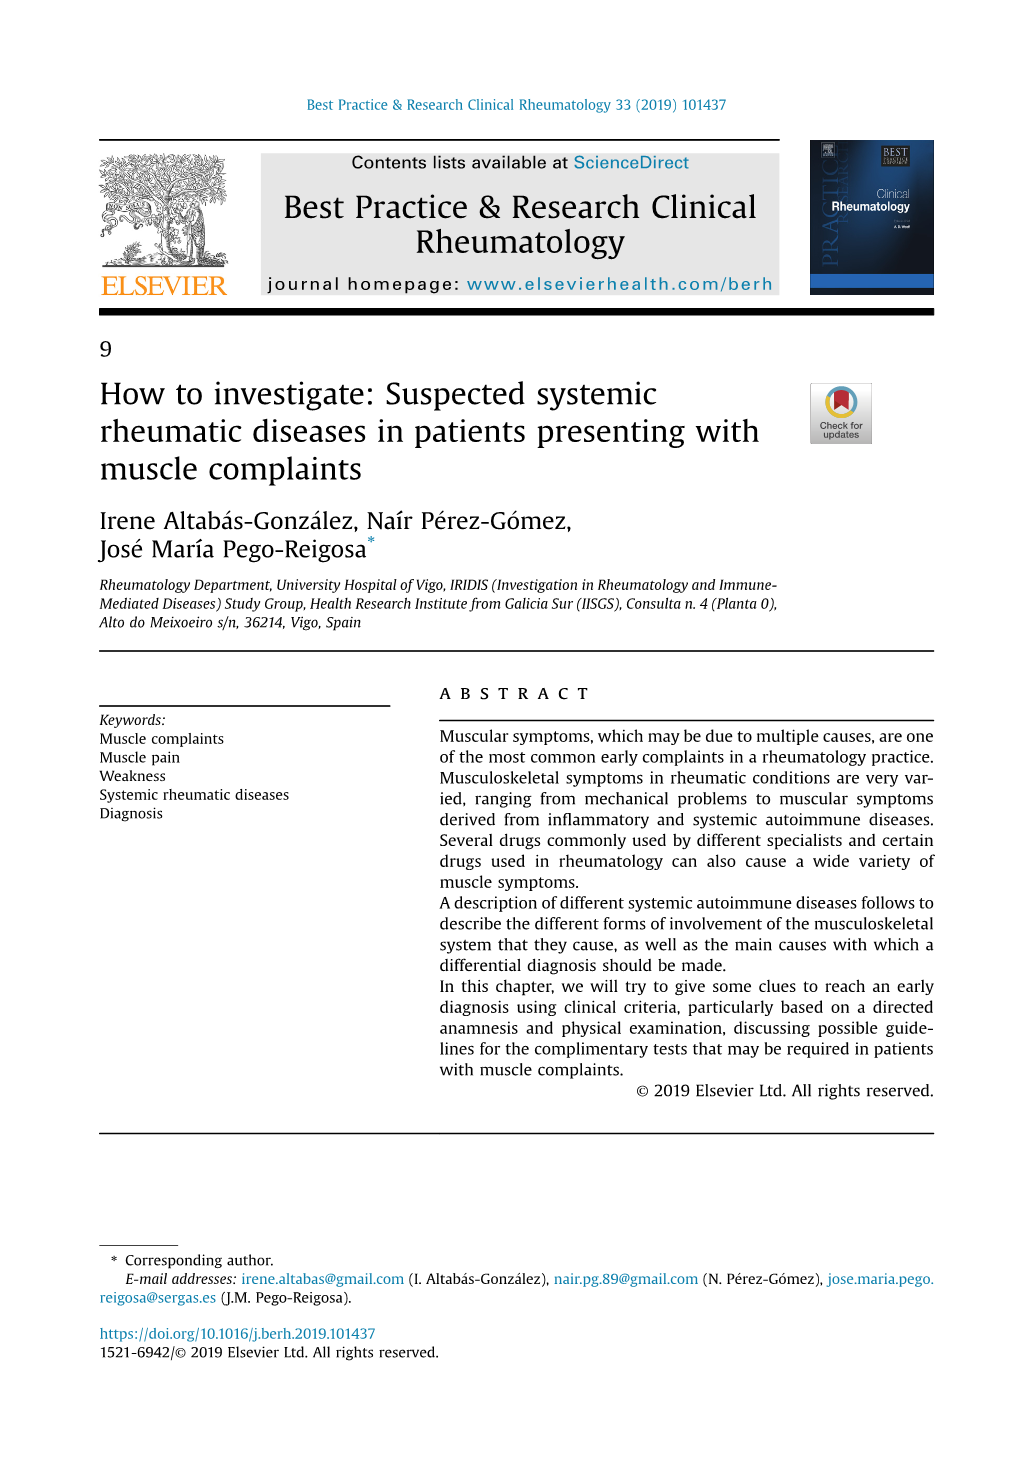 How to Investigate: Suspected Systemic Rheumatic Diseases in Patients Presenting with Muscle Complaints